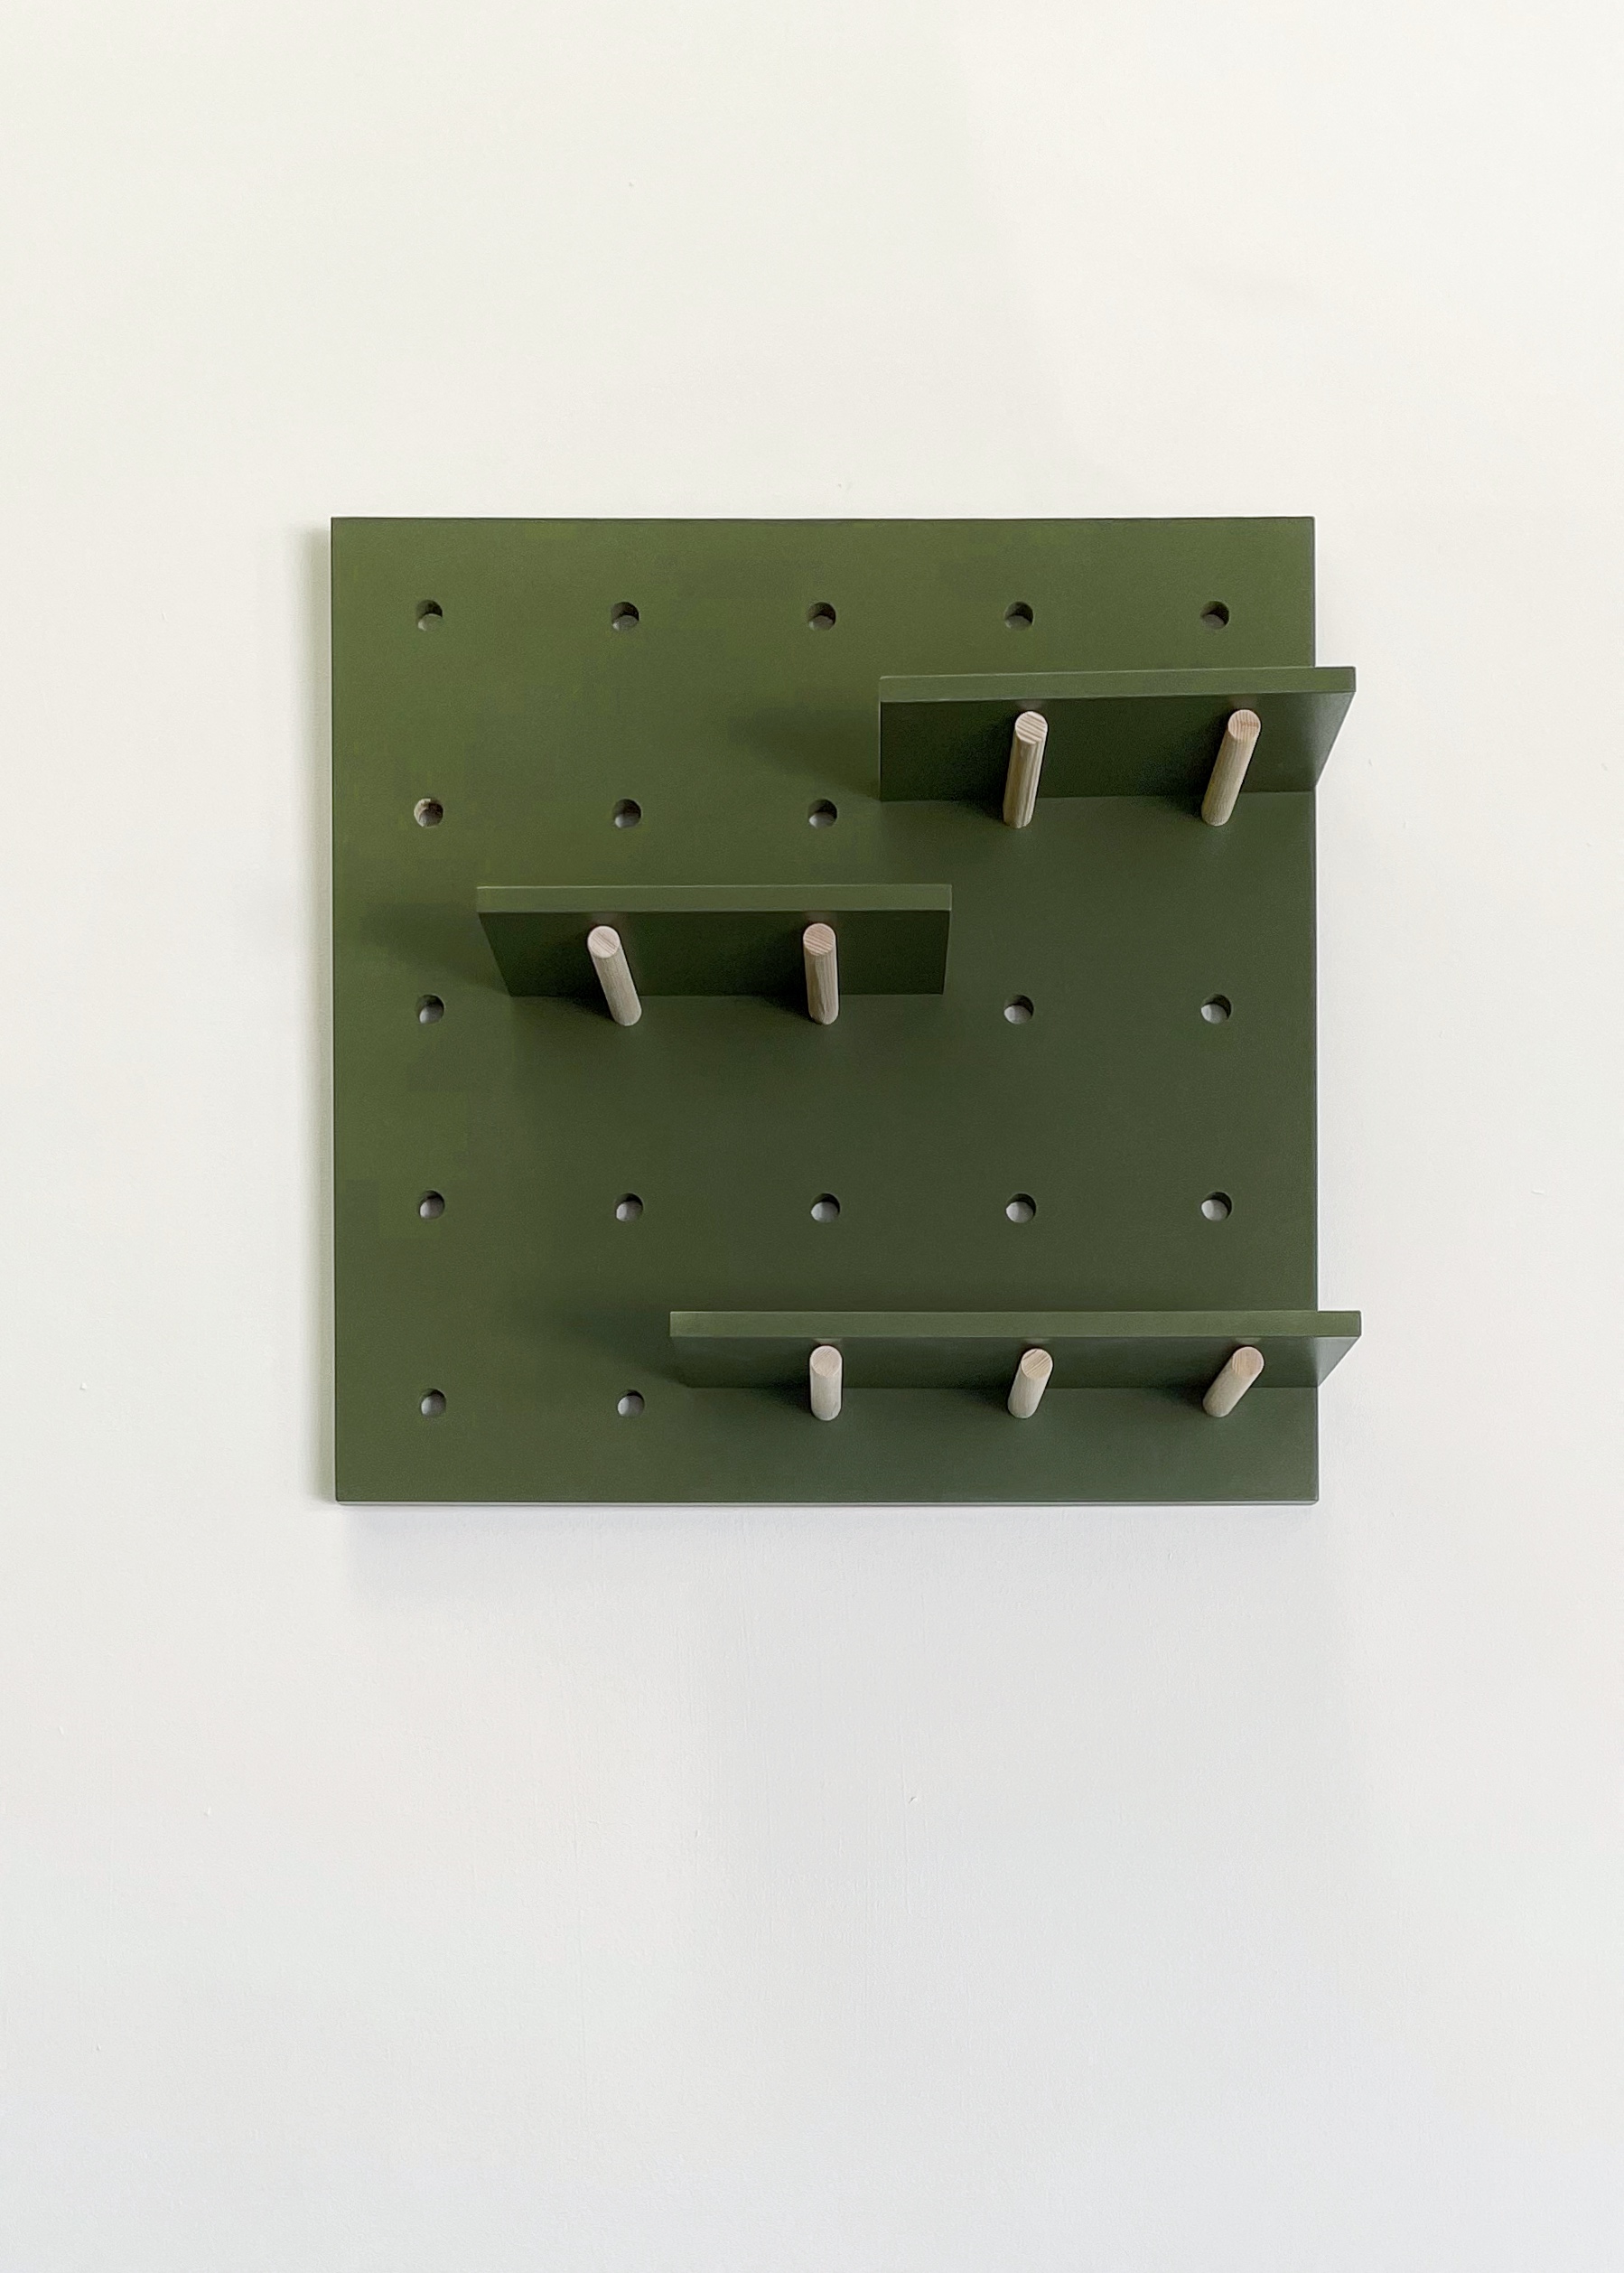 Little Deer Square Pegboard Adjustable Shelving Unit with Shelves & Pegs in Olive Green